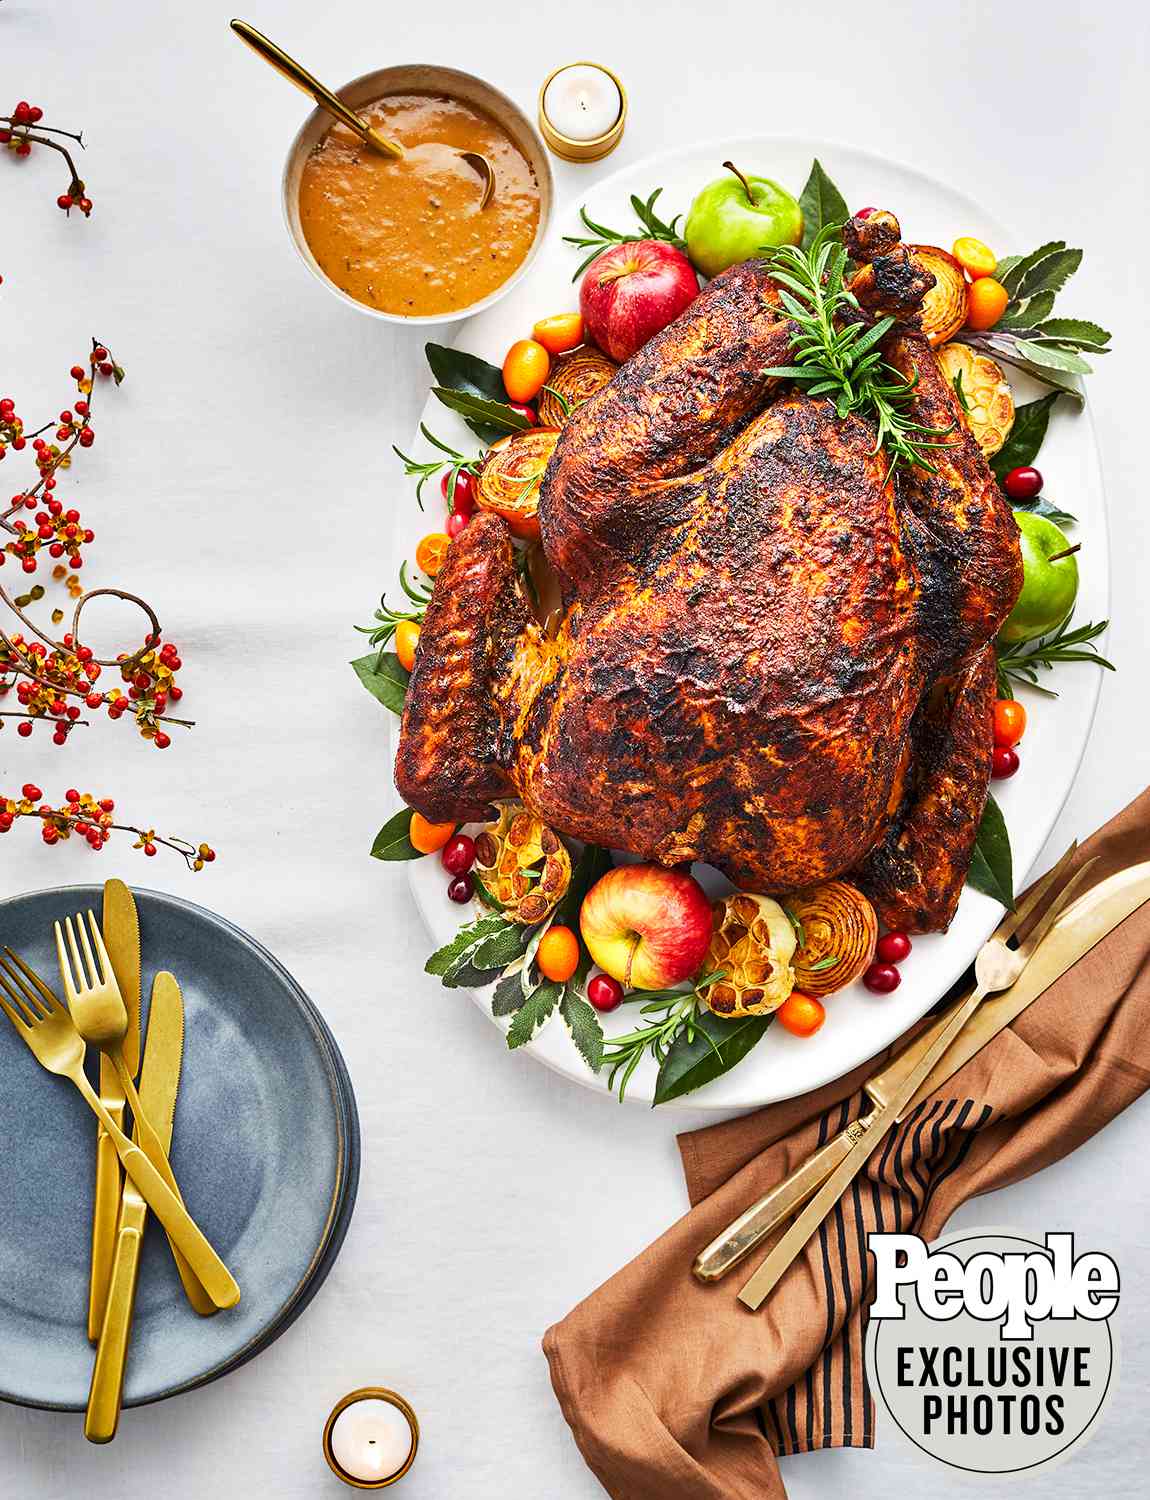 How to Make Curtis Stone's 'No-Fuss' Creole Roast Turkey and Gravy for Thanksgiving This Year